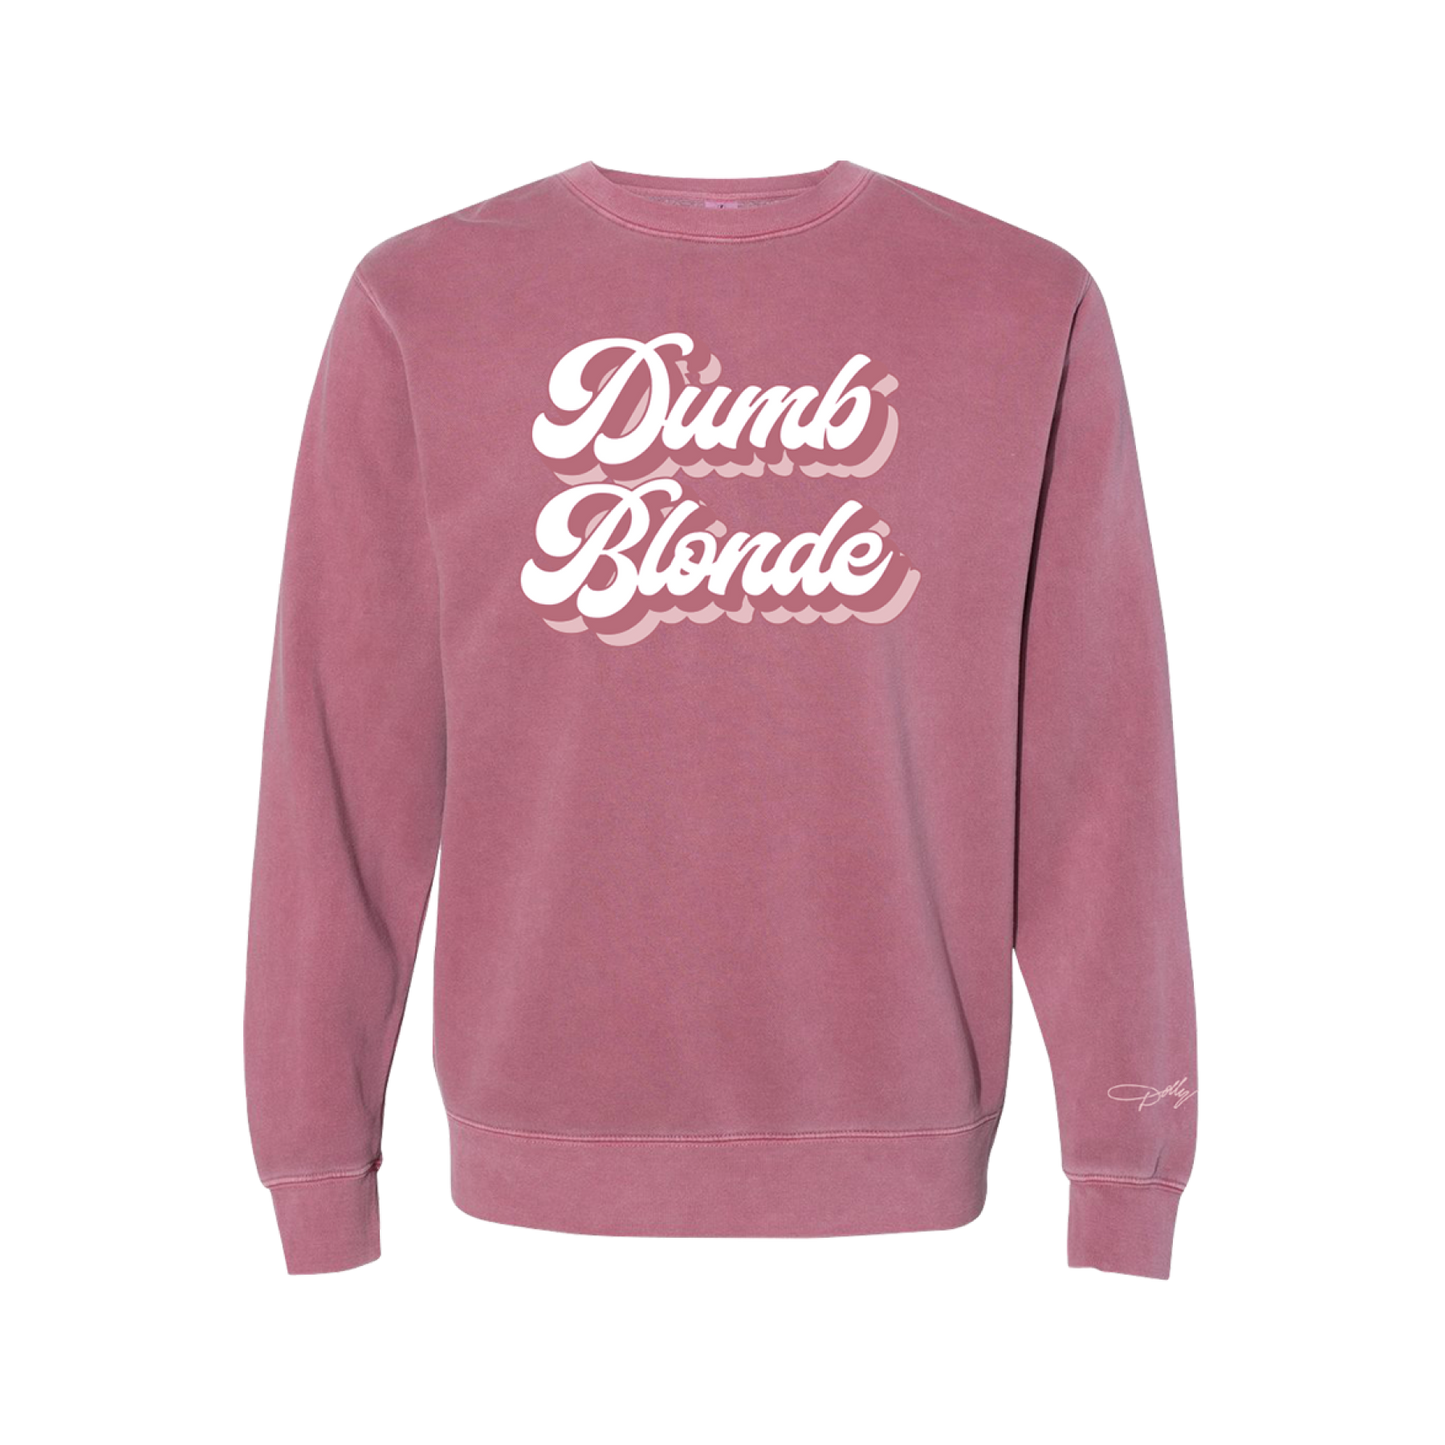 Official Dolly Parton Merchandise. Premium dark pink pigment dyed cotton crewneck sweatshirt with the words Dumb Blonde printed on the front stack with different colors of pink.